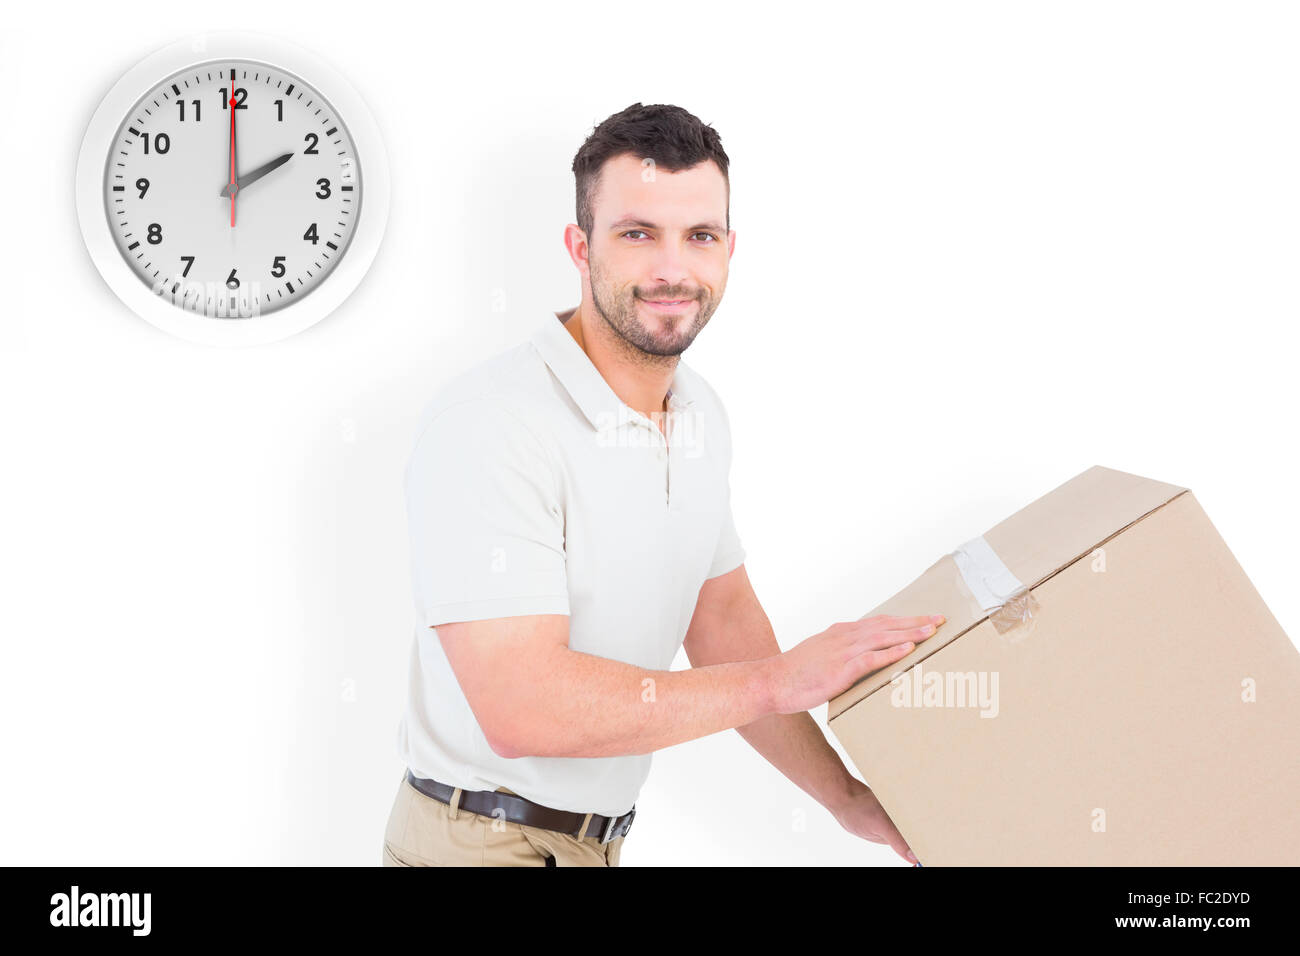 Composite image of delivery man pushing trolley of boxes Stock Photo